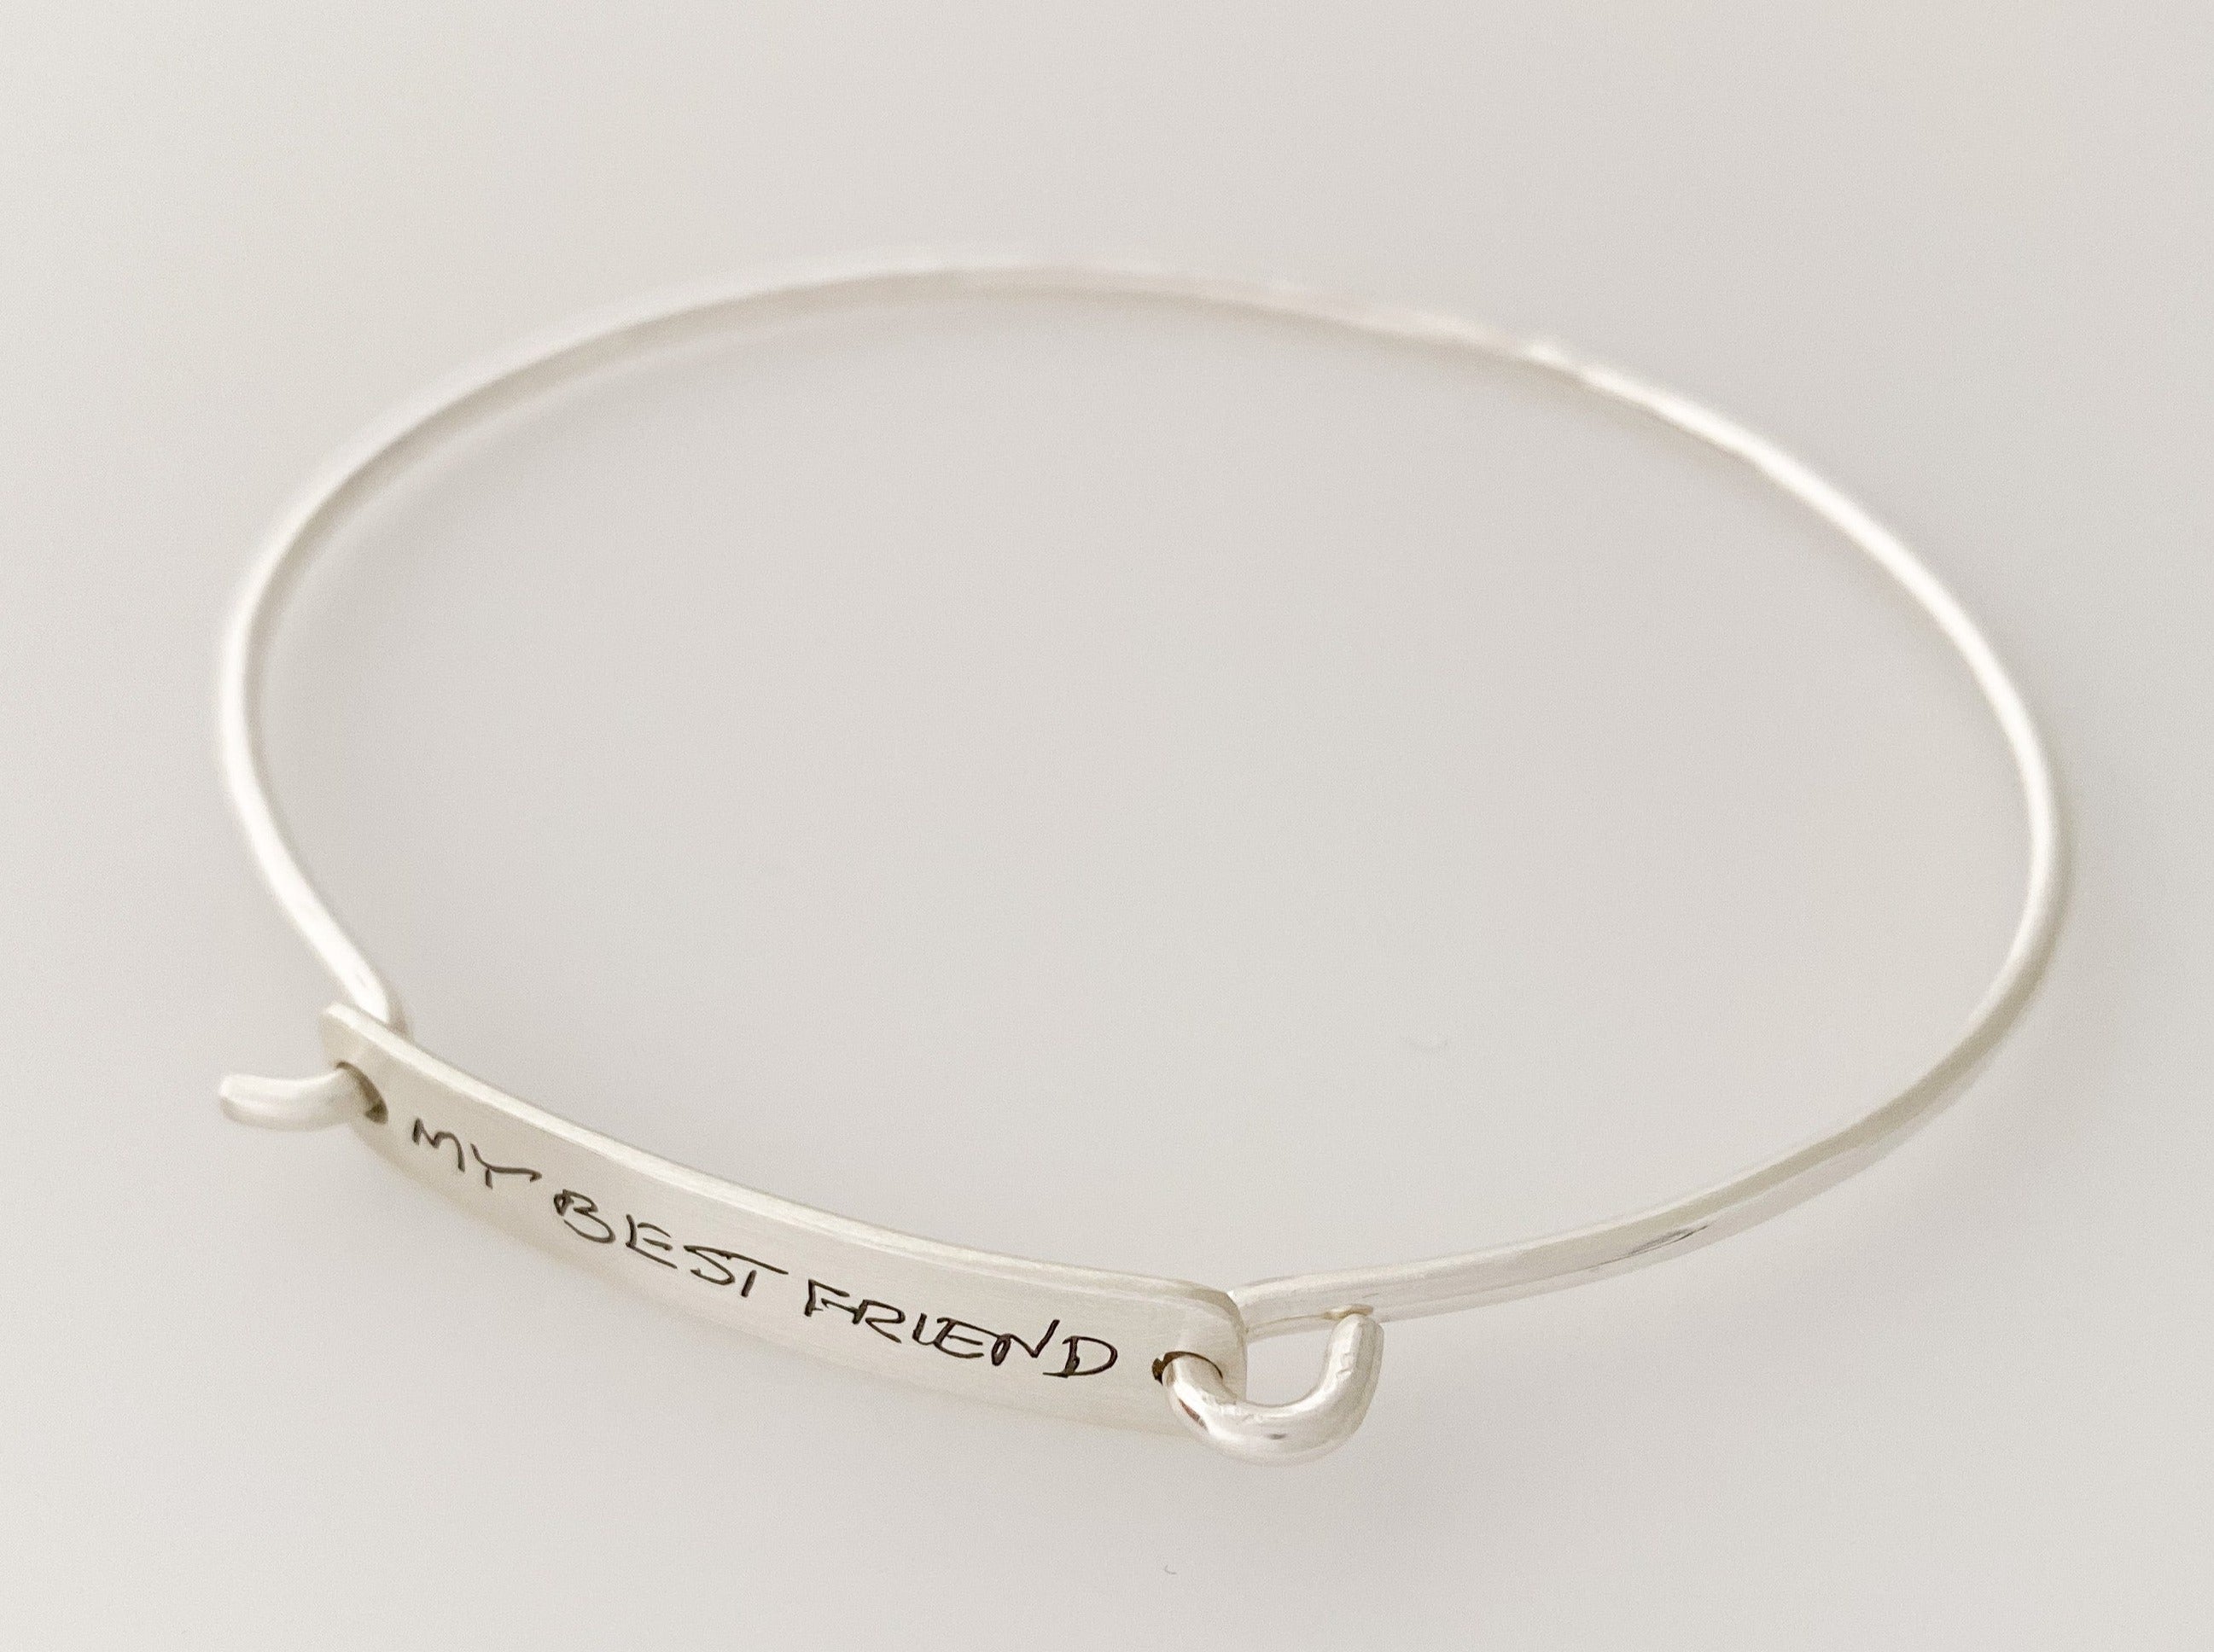 Taylor Bracelet | Engraved with Your Own Writing, Signatures Handprints and Doodles | Sentimental Touching Gifts for Her | Scripted Jewelry